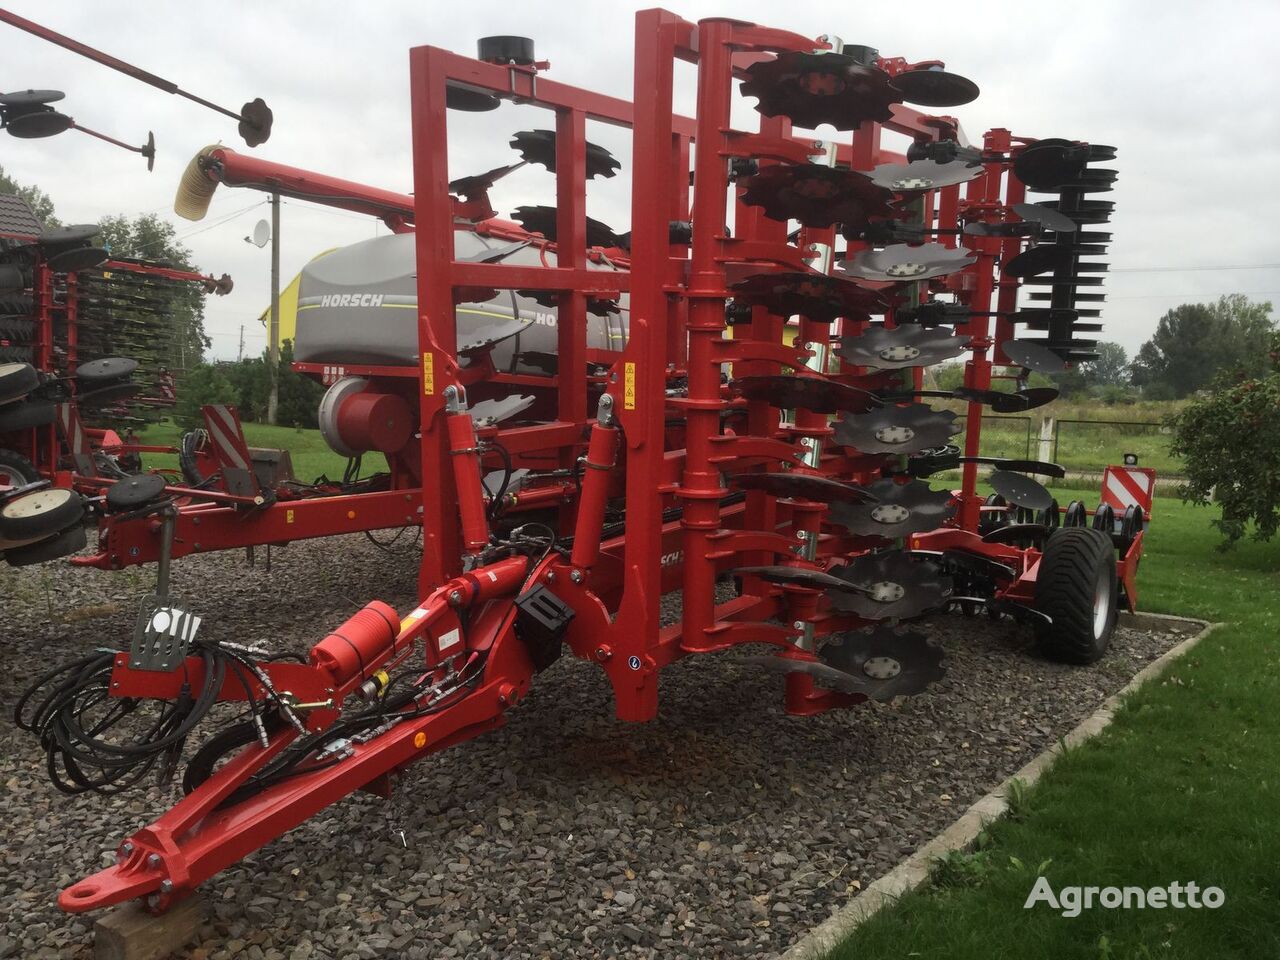 ny Horsch Tiger 6 MT seedbed cultivator